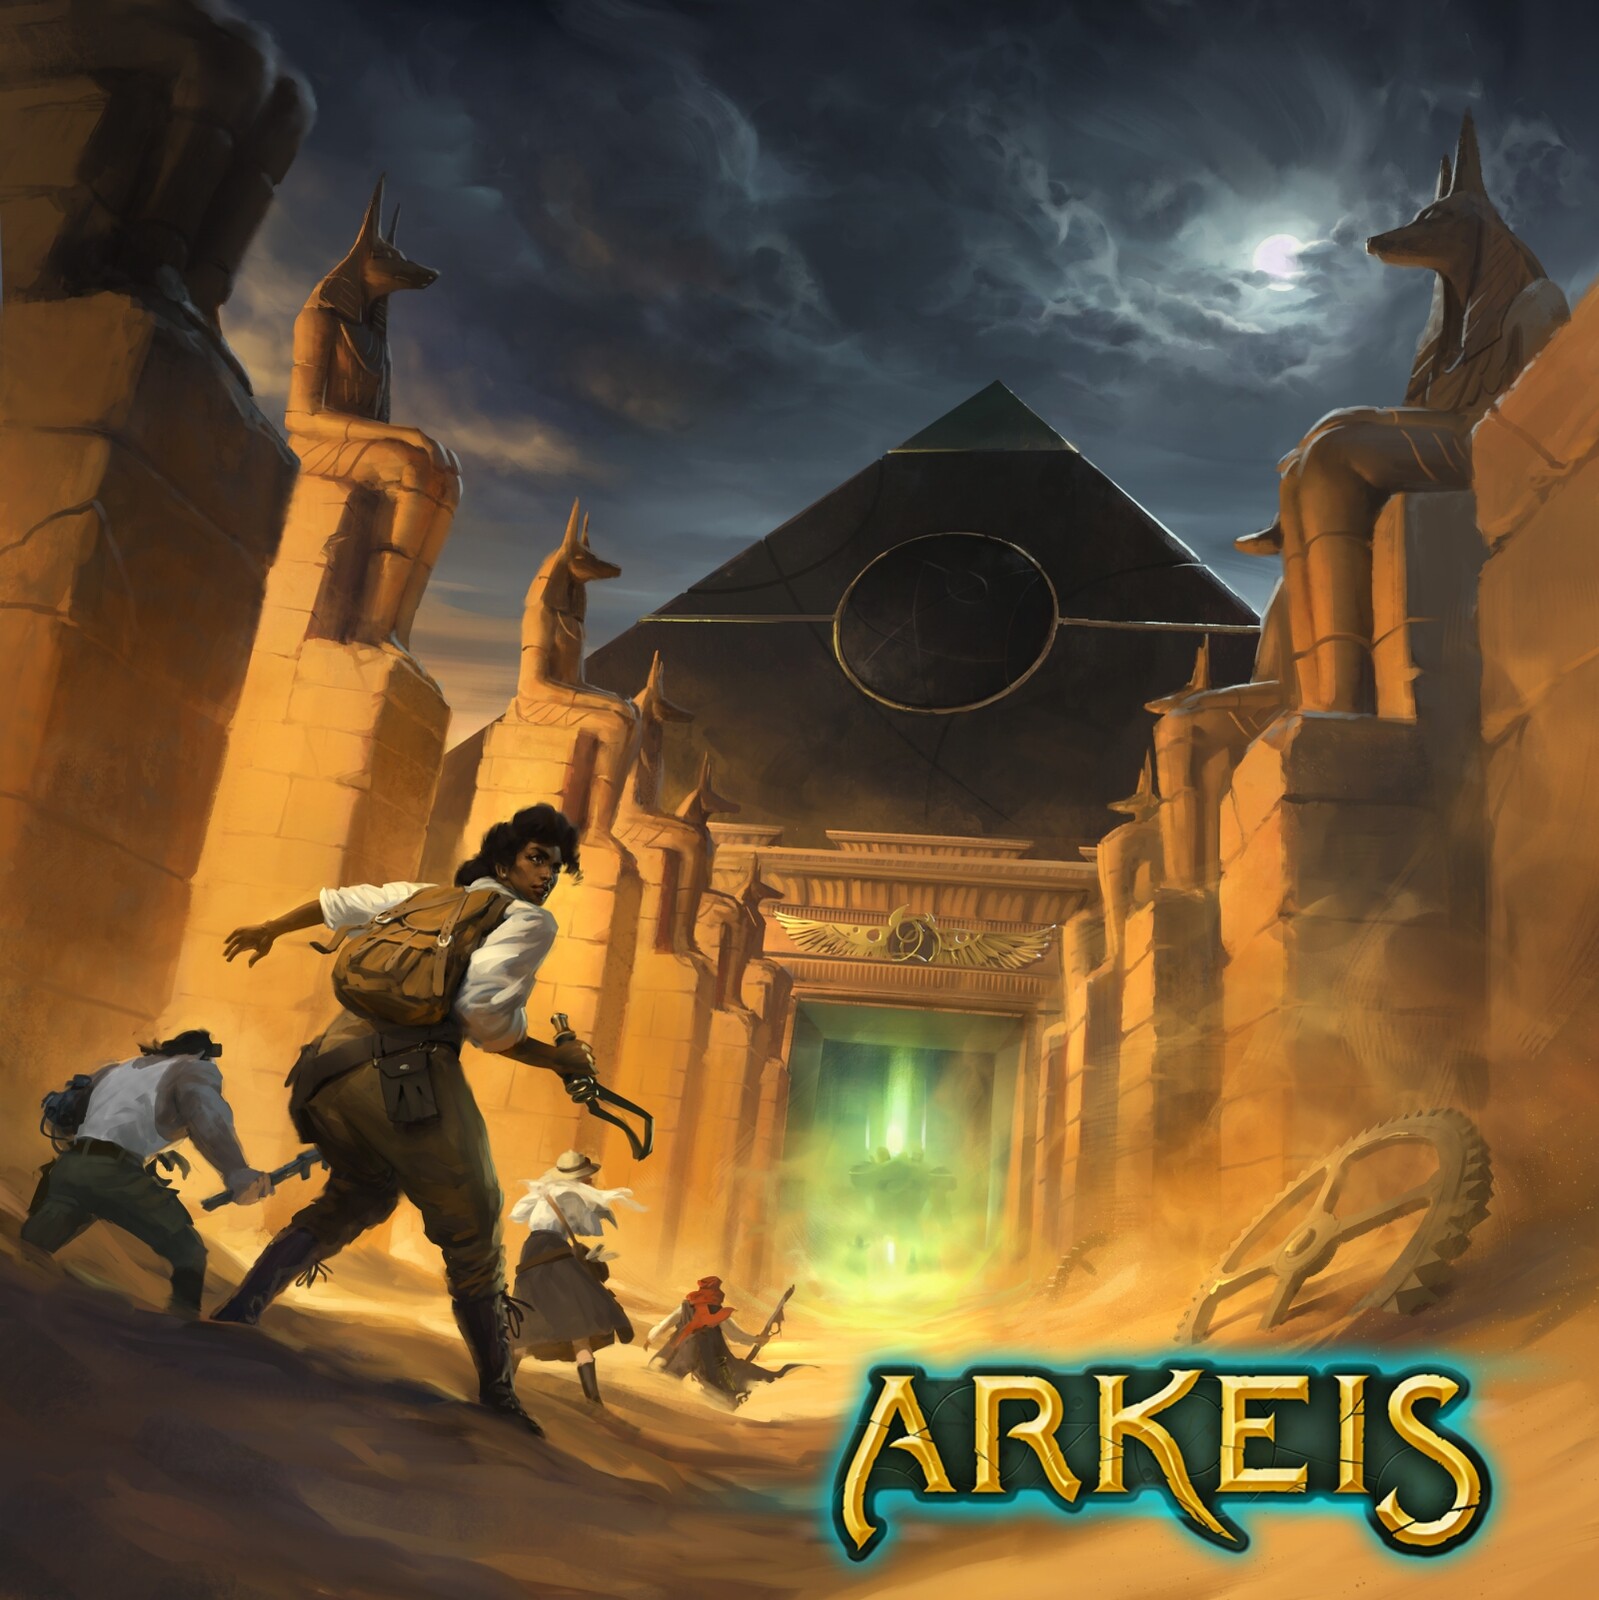 Arkeis : The Entrance of the Pyramid